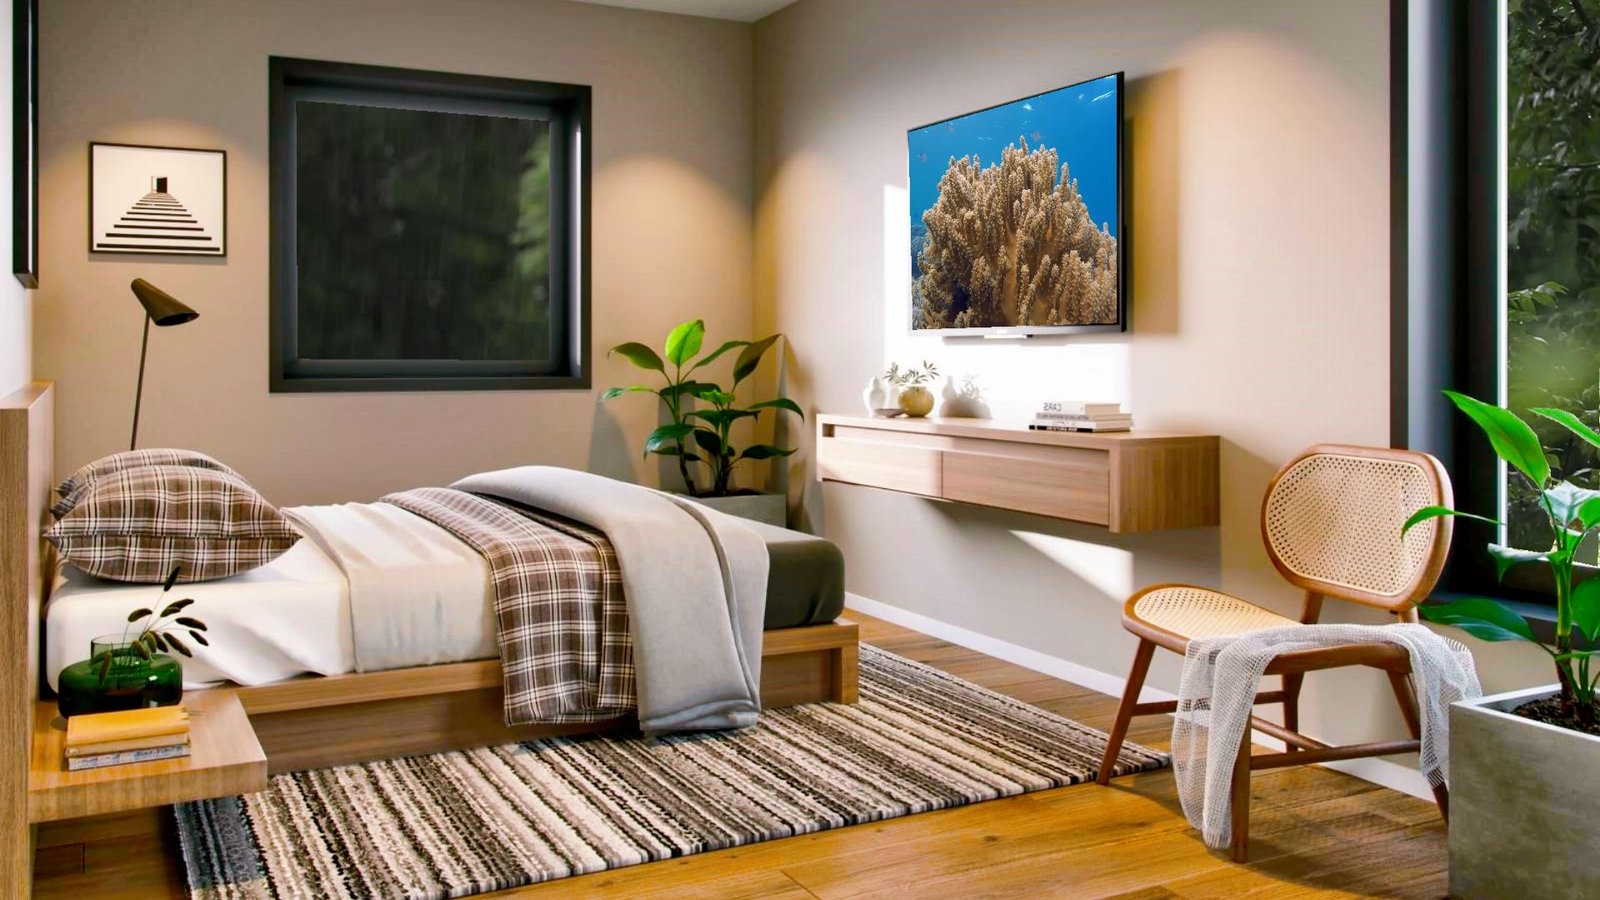 How can visually enlarge a small bedroom